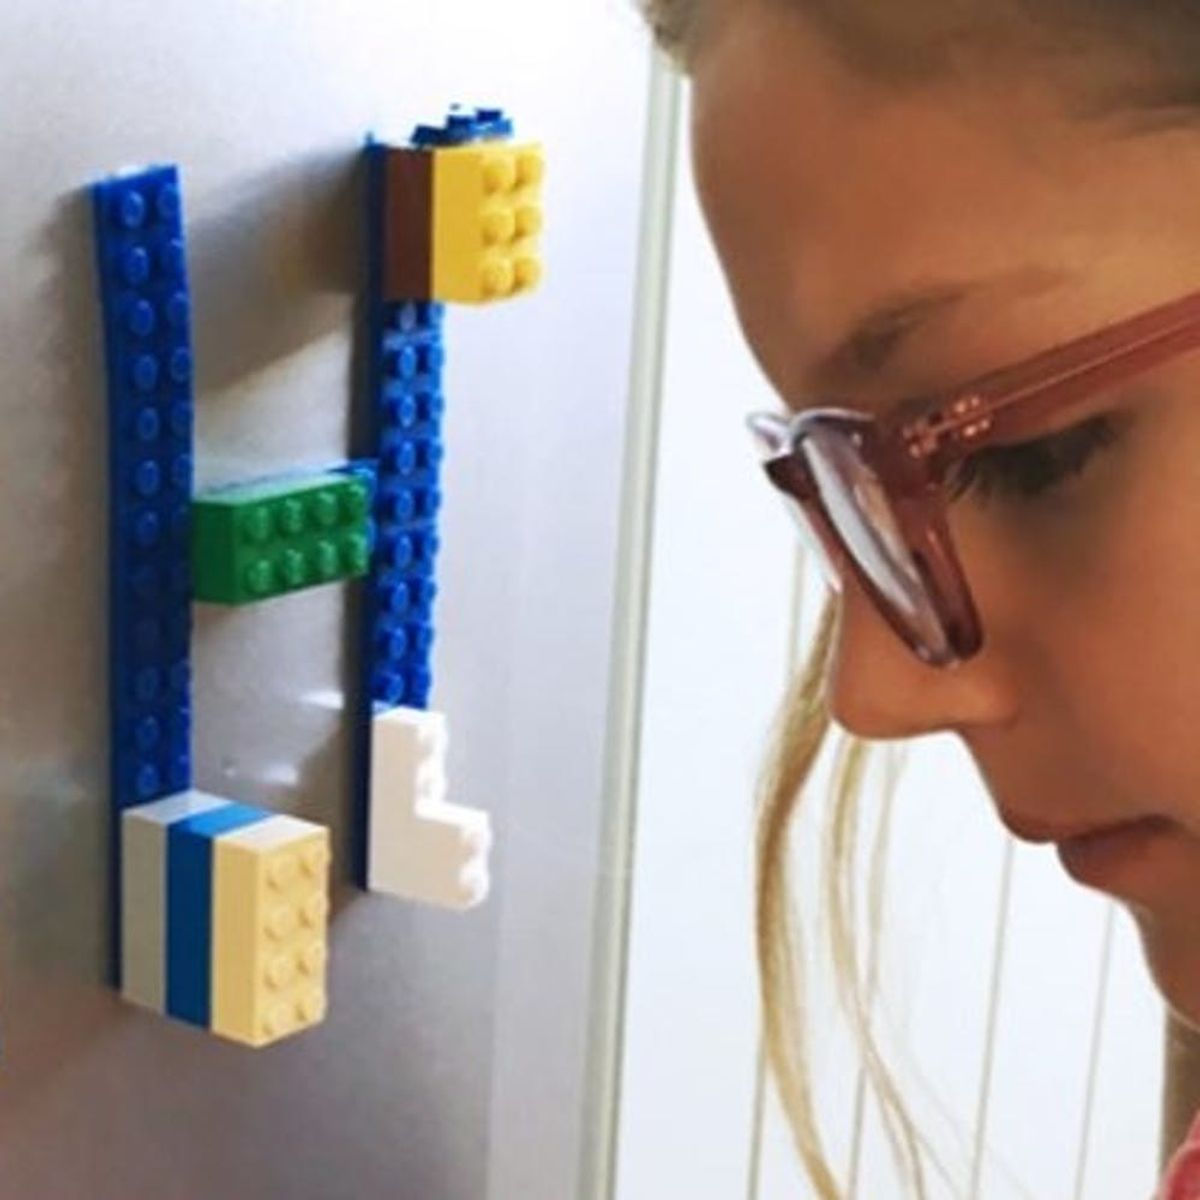 LEGO Compatible Adhesive Tape Is the New (Brilliant) Must-Have Toy